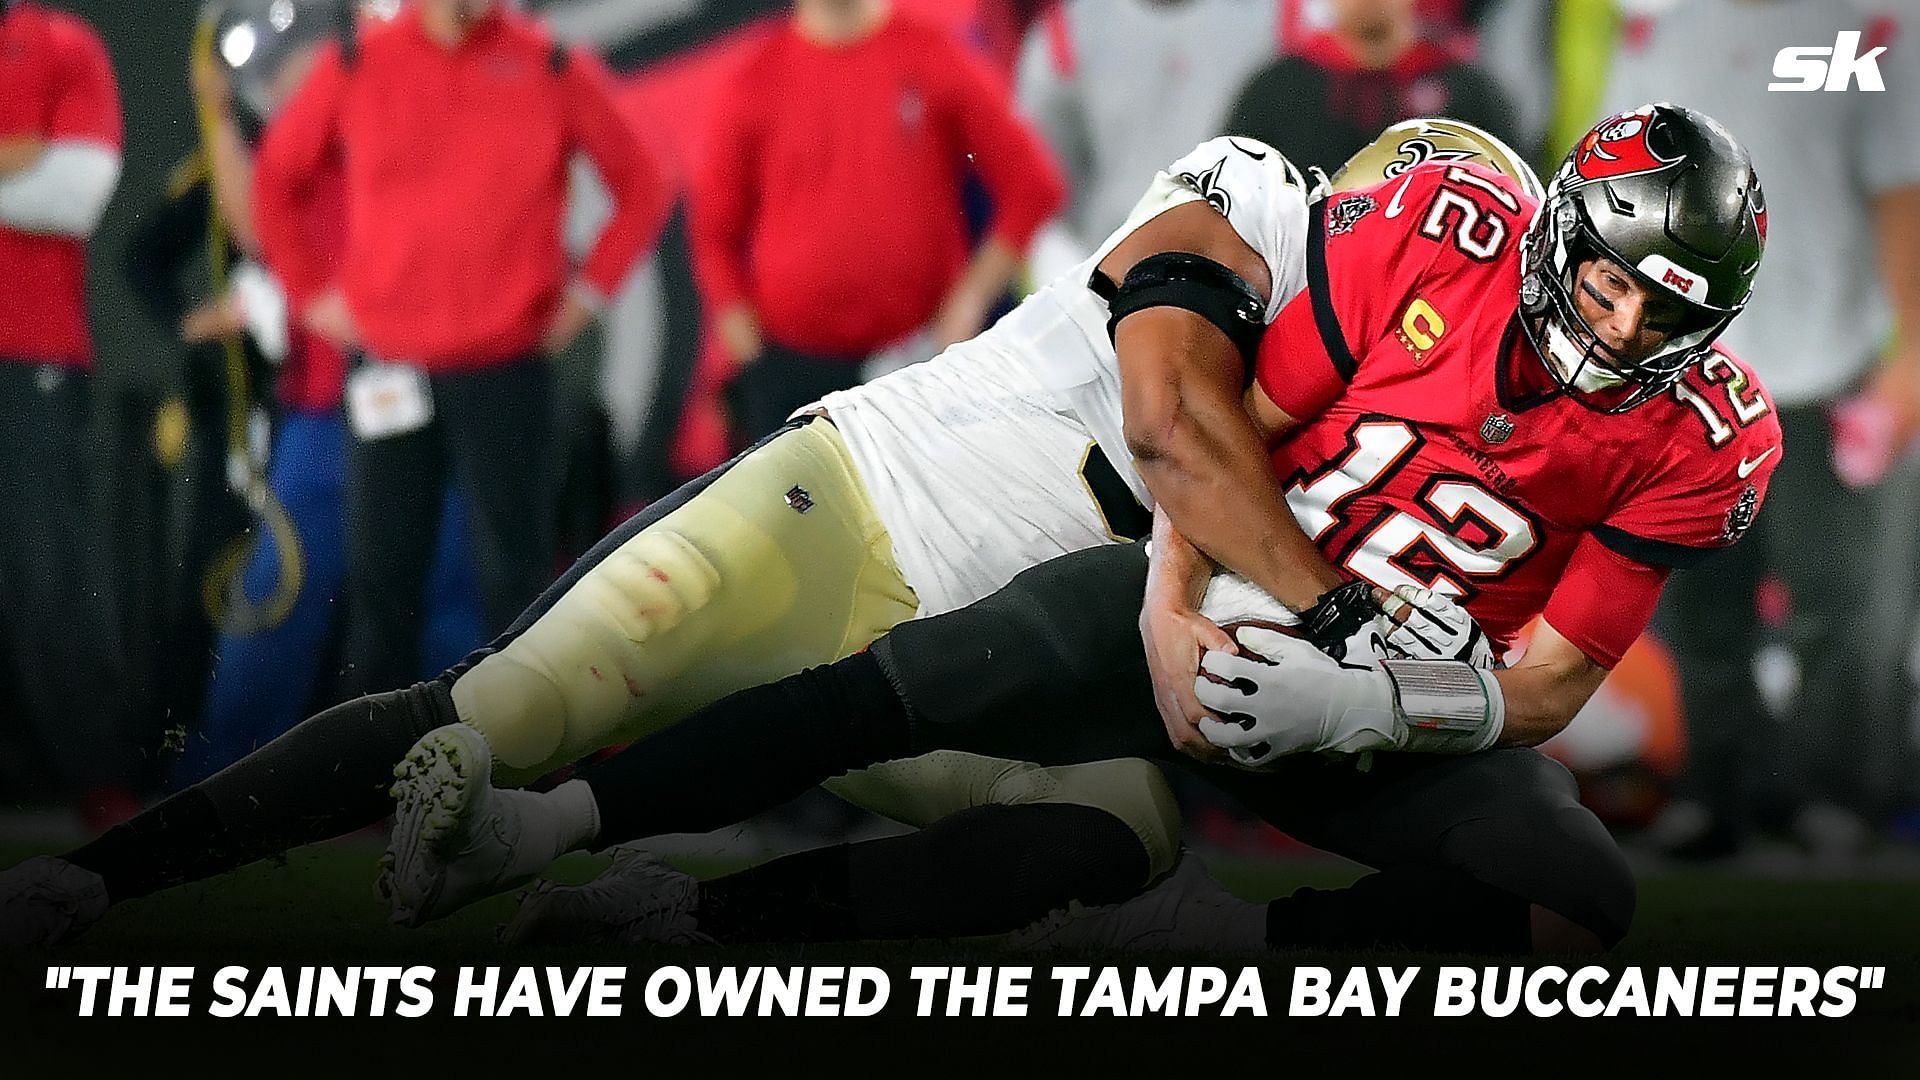 Will the Tampa Bay Buccaneers lose out on becoming the top seed in the NFC South this season?